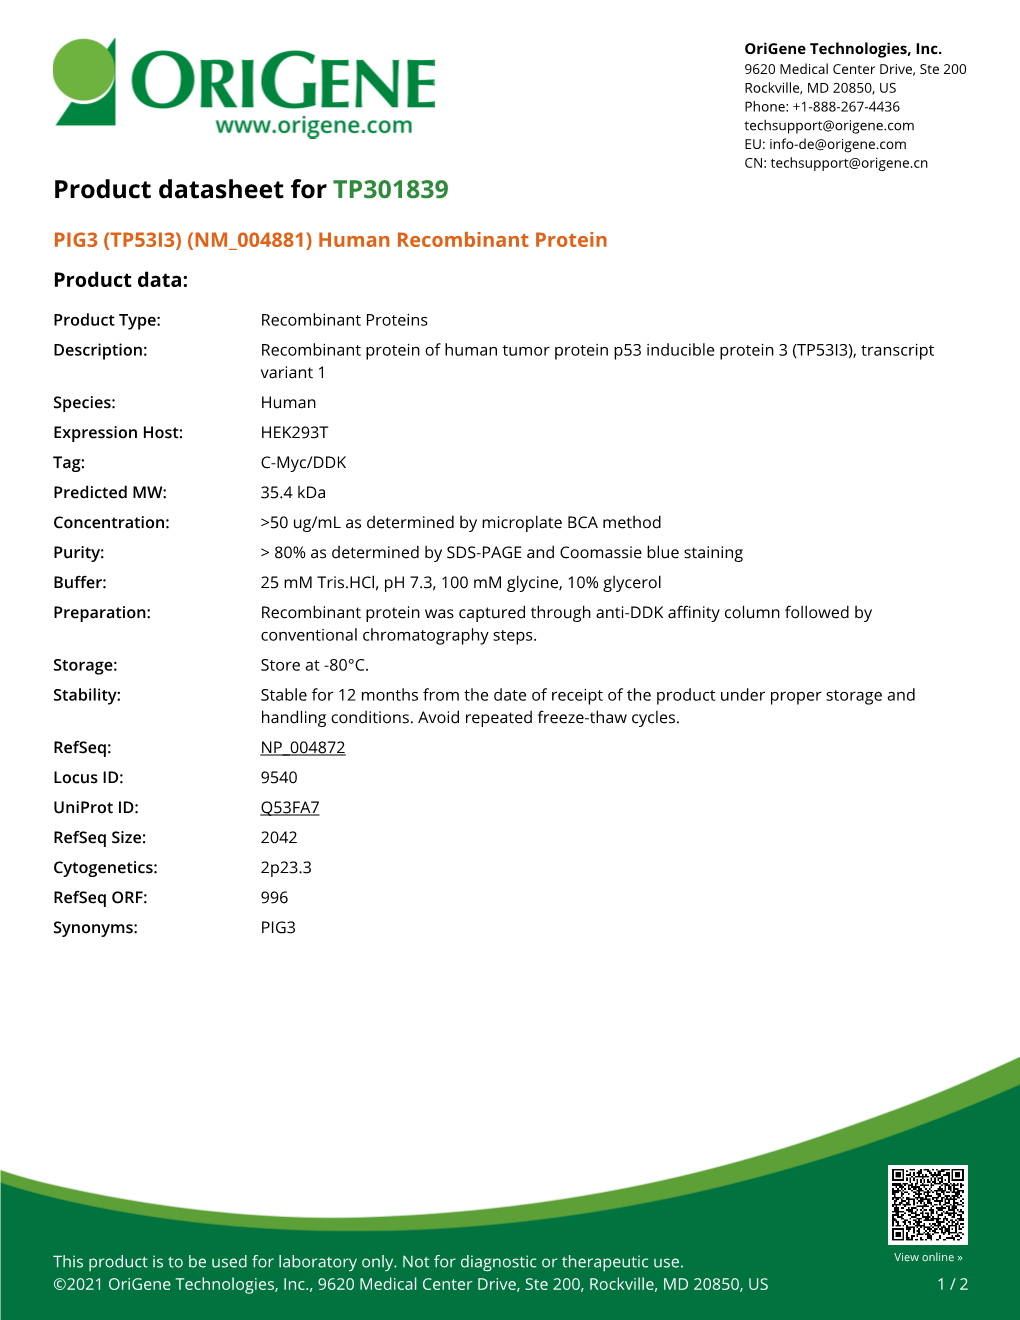 PIG3 (TP53I3) (NM 004881) Human Recombinant Protein Product Data